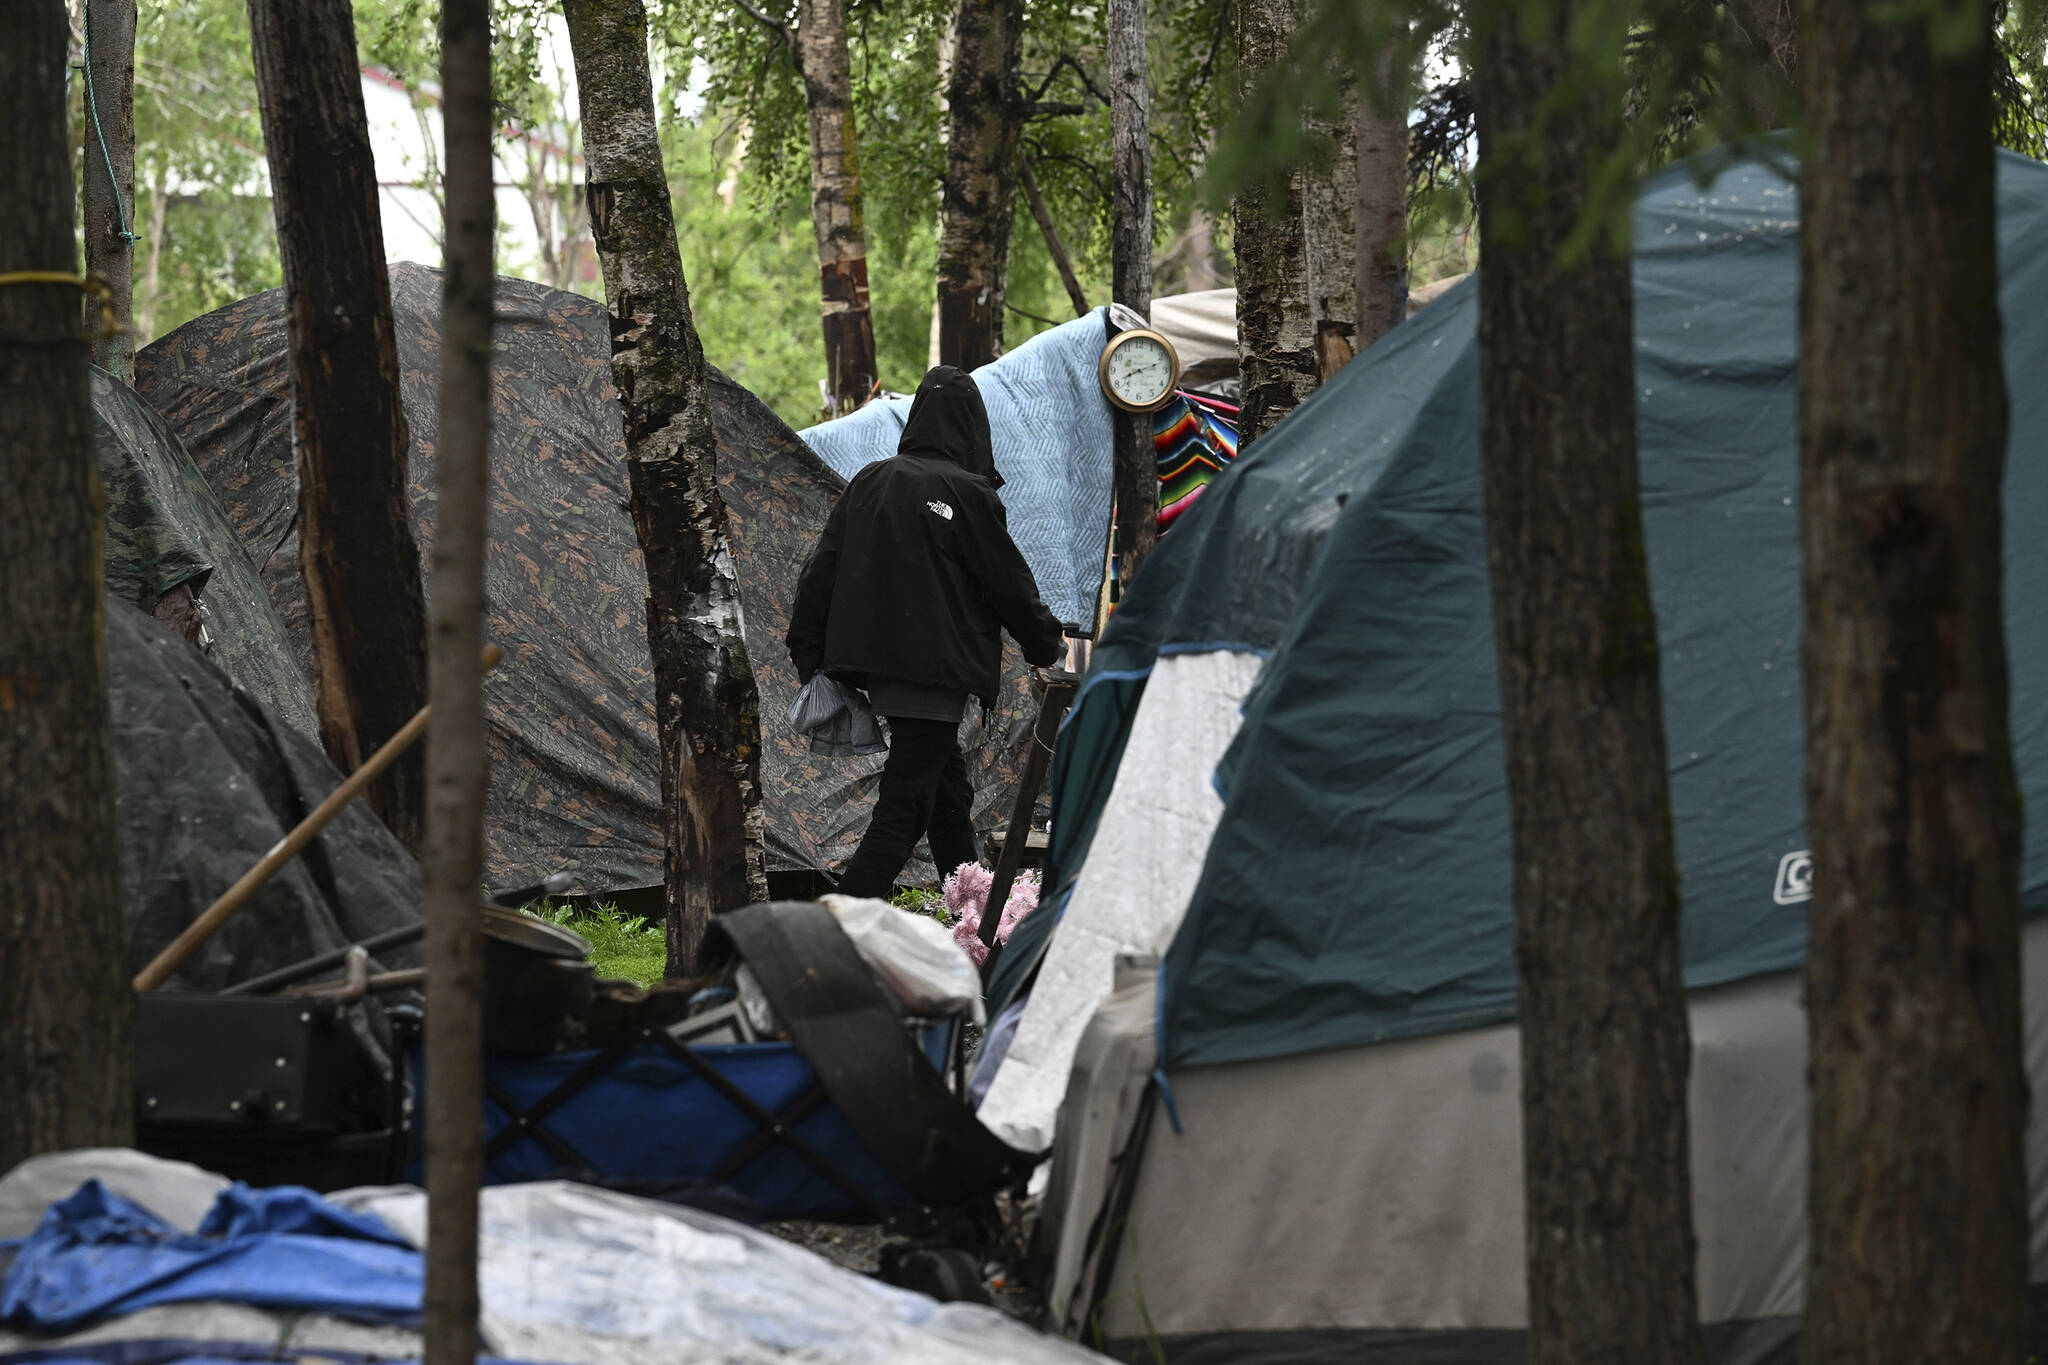 Tents fill a homeless camp near Davis Park in Mountain View on July 3 in Anchorage. An unfunded proposal by Anchorage’s mayor to pay for plane tickets to warmer climates for homeless people who would otherwise be forced to winter outside in the bitter cold has caused a stir in Alaska’s biggest city. If the program moves forward, people can choose to relocate to the Lower 48 or somewhere else in Alaska where it might be warmer or where they have relatives. (Bill Roth / AP)